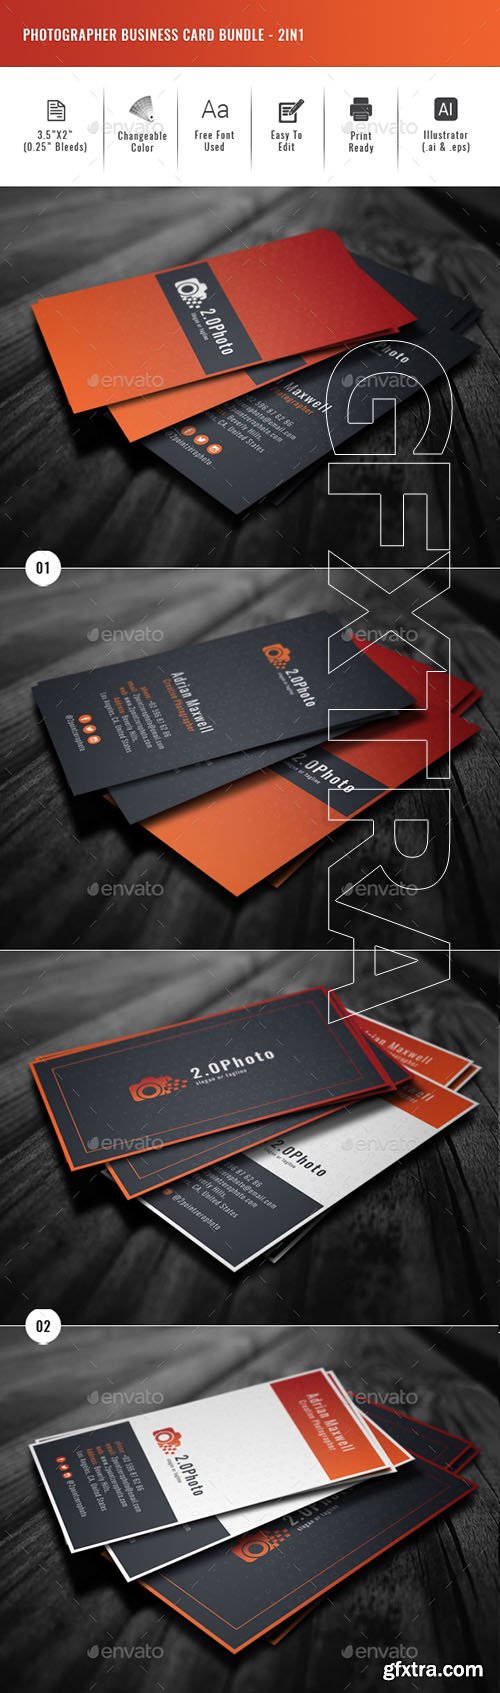 GraphicRiver - Photographer Business Card Bundle - 2in1 22673982